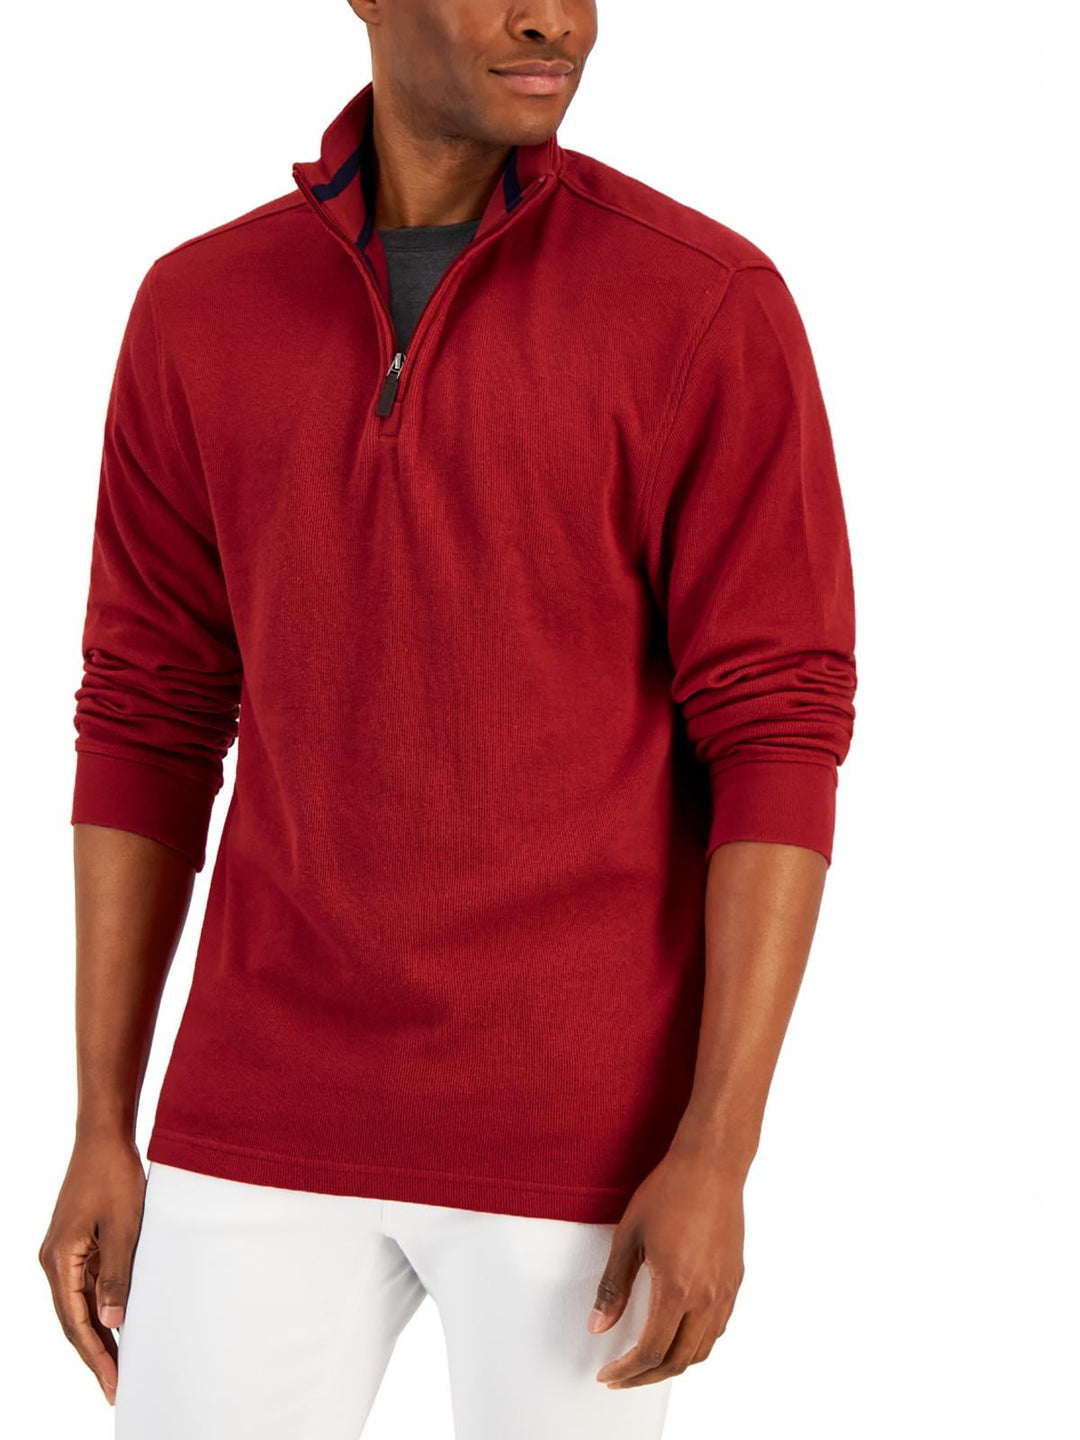 Club Room Men's 1/4 Zip Mock Neck Pullover Sweater Red Size X-Large